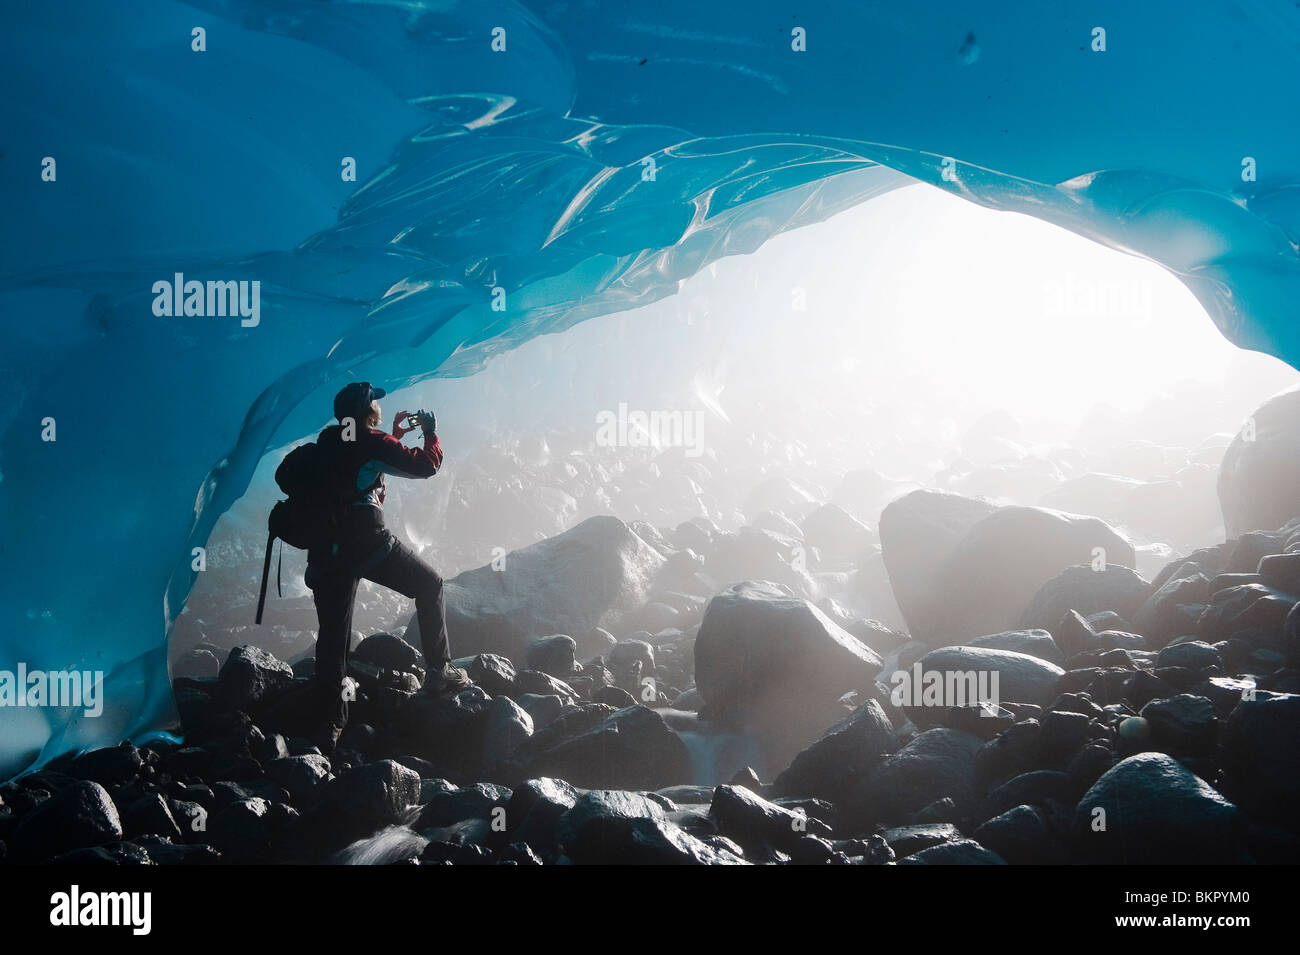 A hiker takes a photograph of the entrance of an ice cave from the inside of the Mendenhall Glacier, Southeast Alaska, Summer Stock Photo